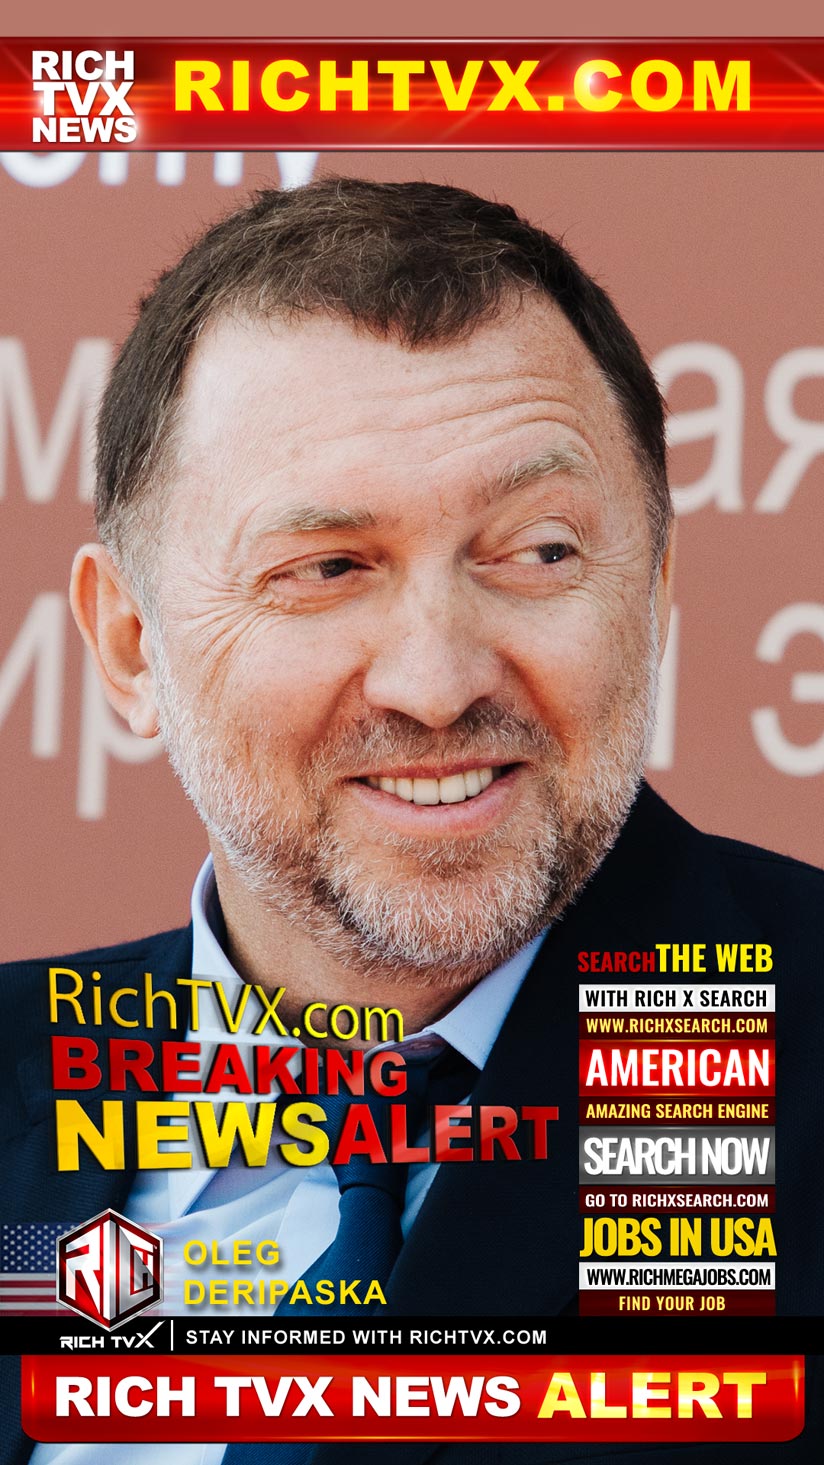 Oleg Deripaska, the Russian Oligarch, Advised to Steer Clear of Tea and High Windows